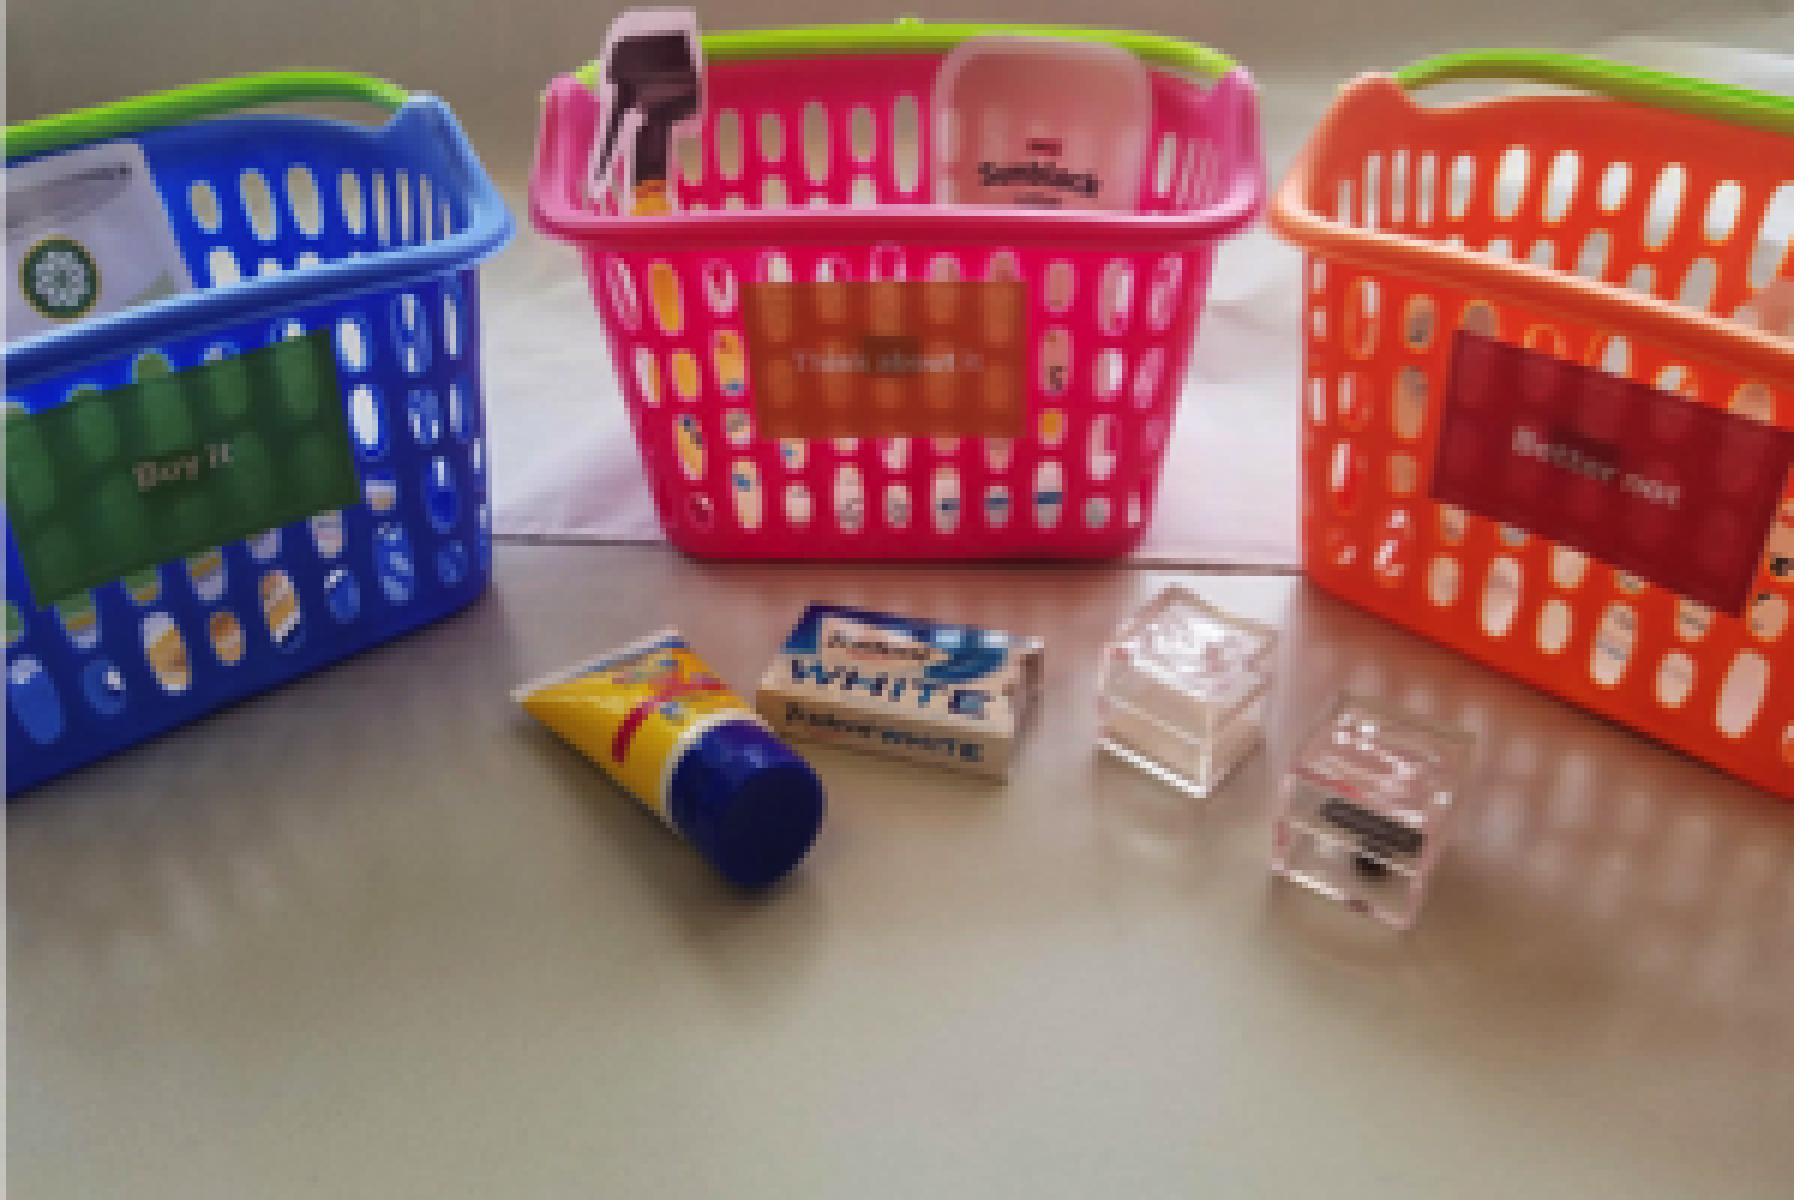 Plastic grocery baskets along with grocery store purchases including sunblock